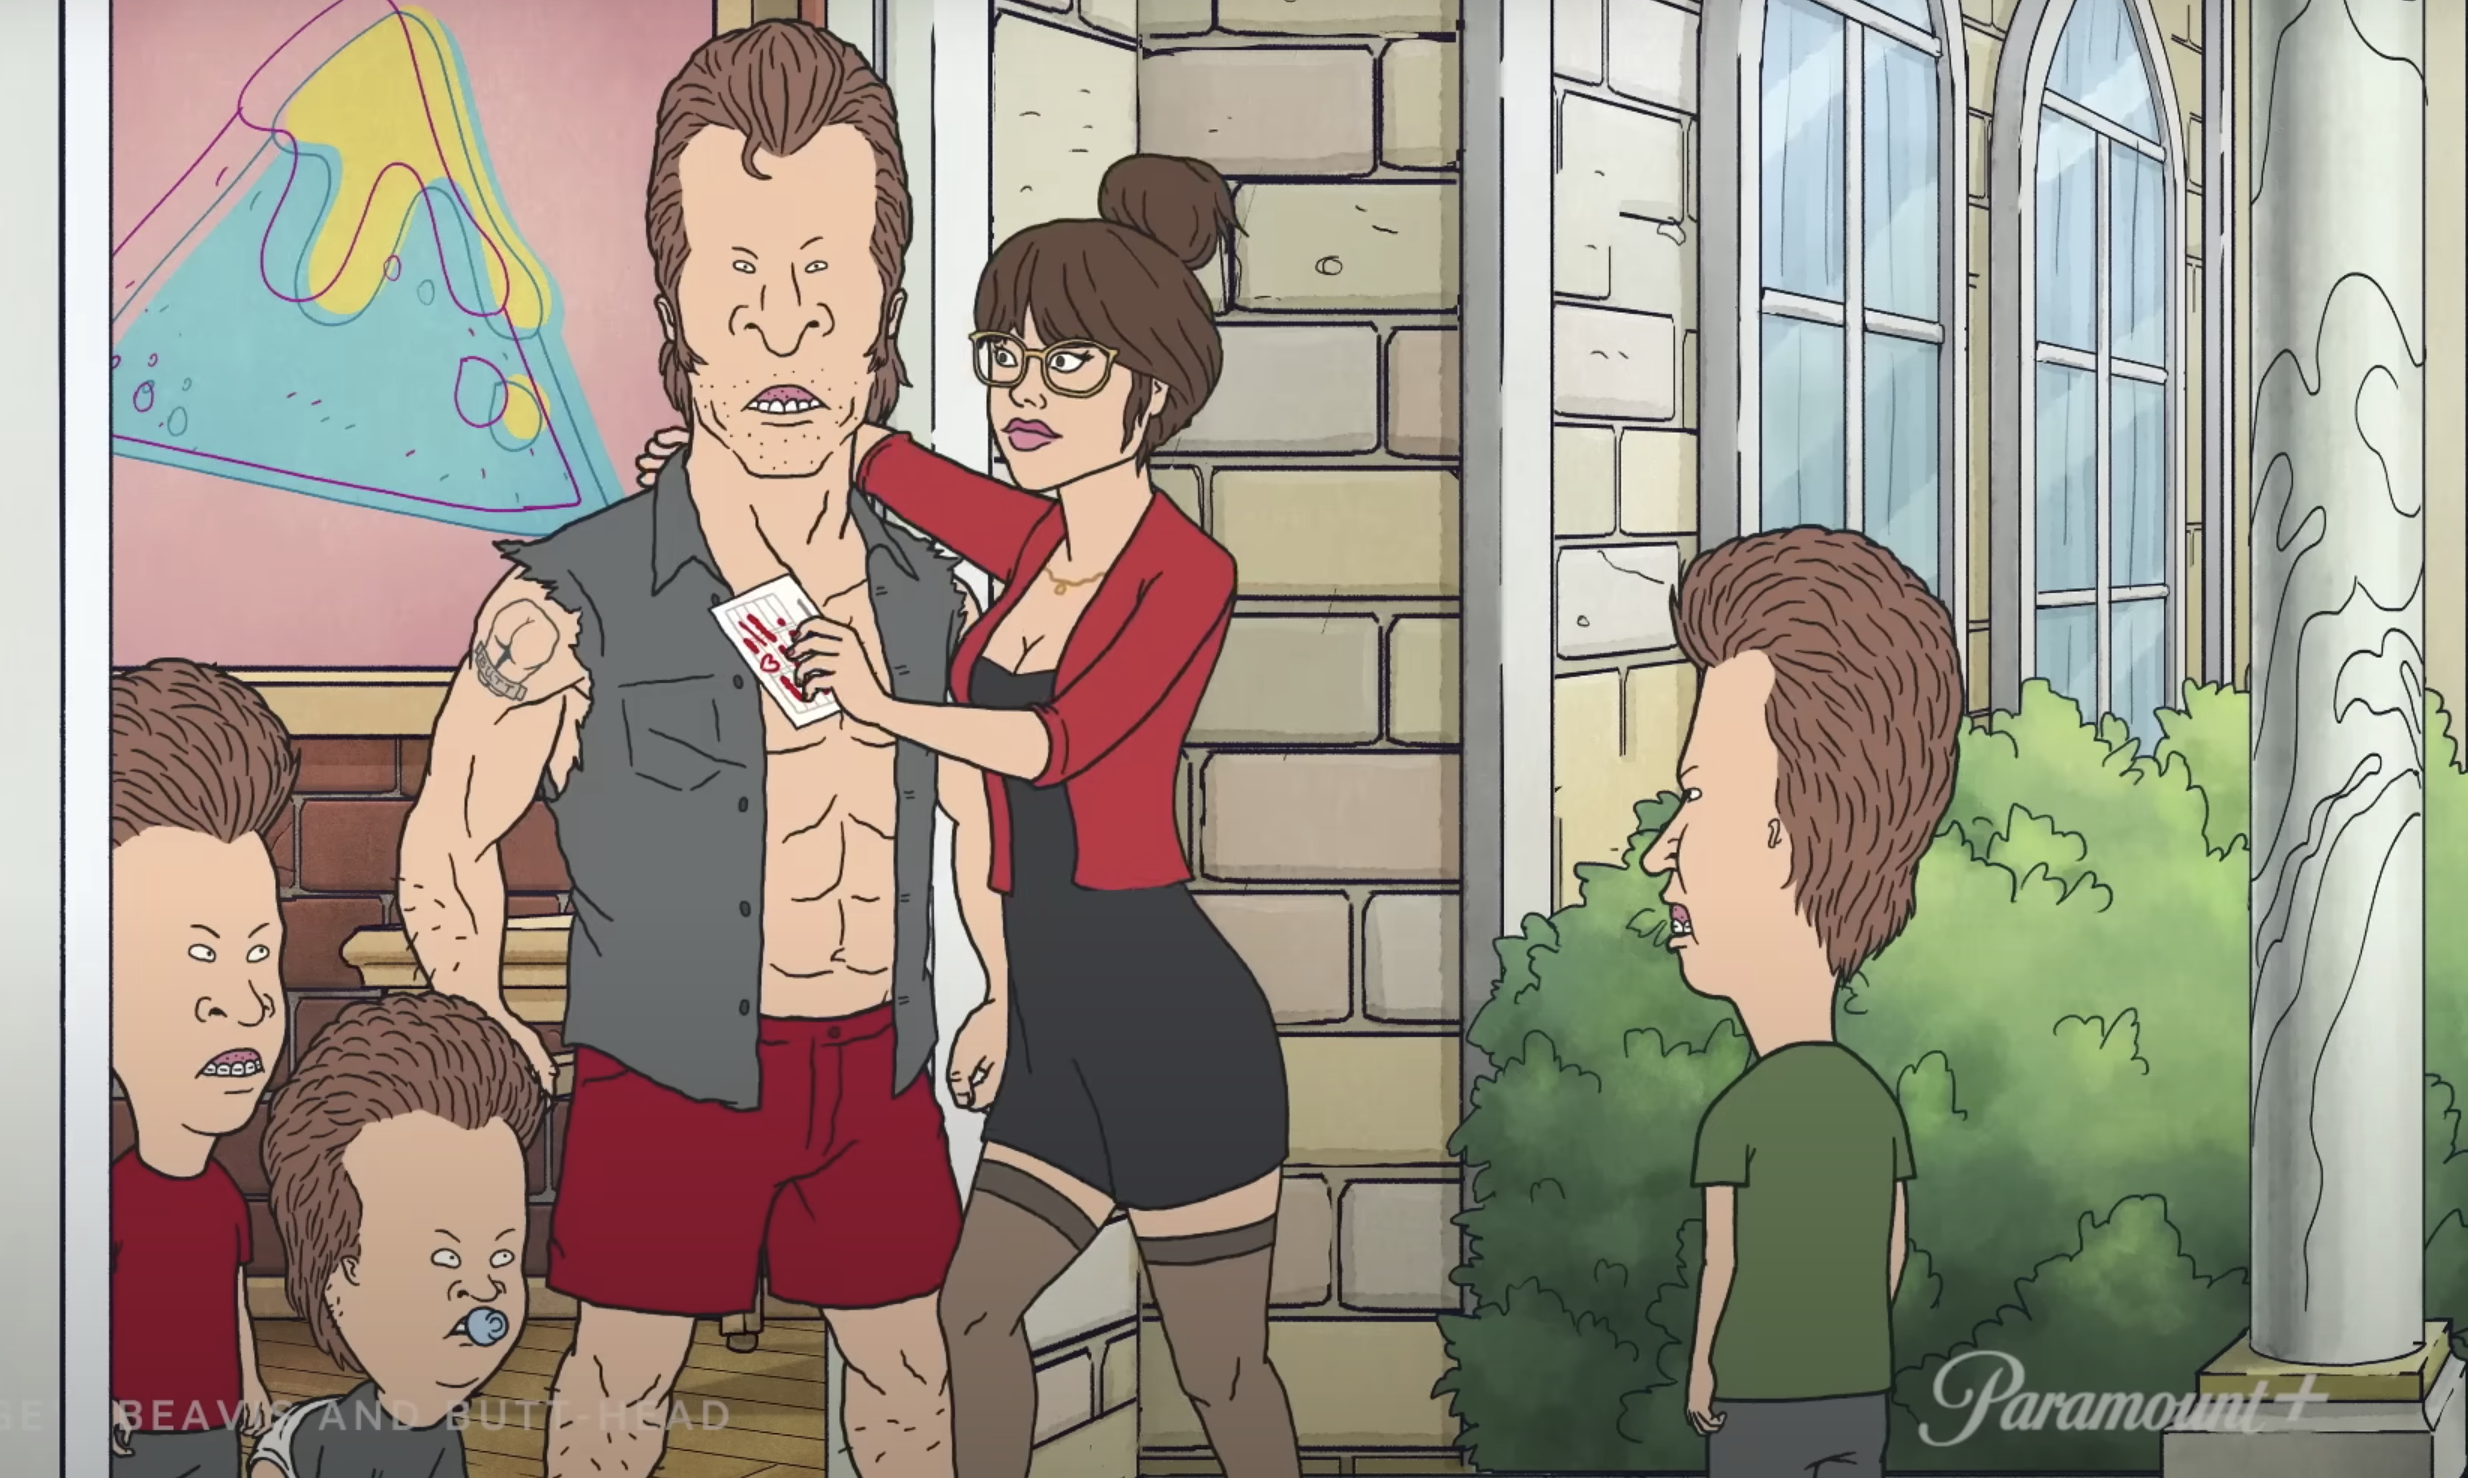 Mike Judge Talks Beavis and Butt-Head, King of the Hill Reboot